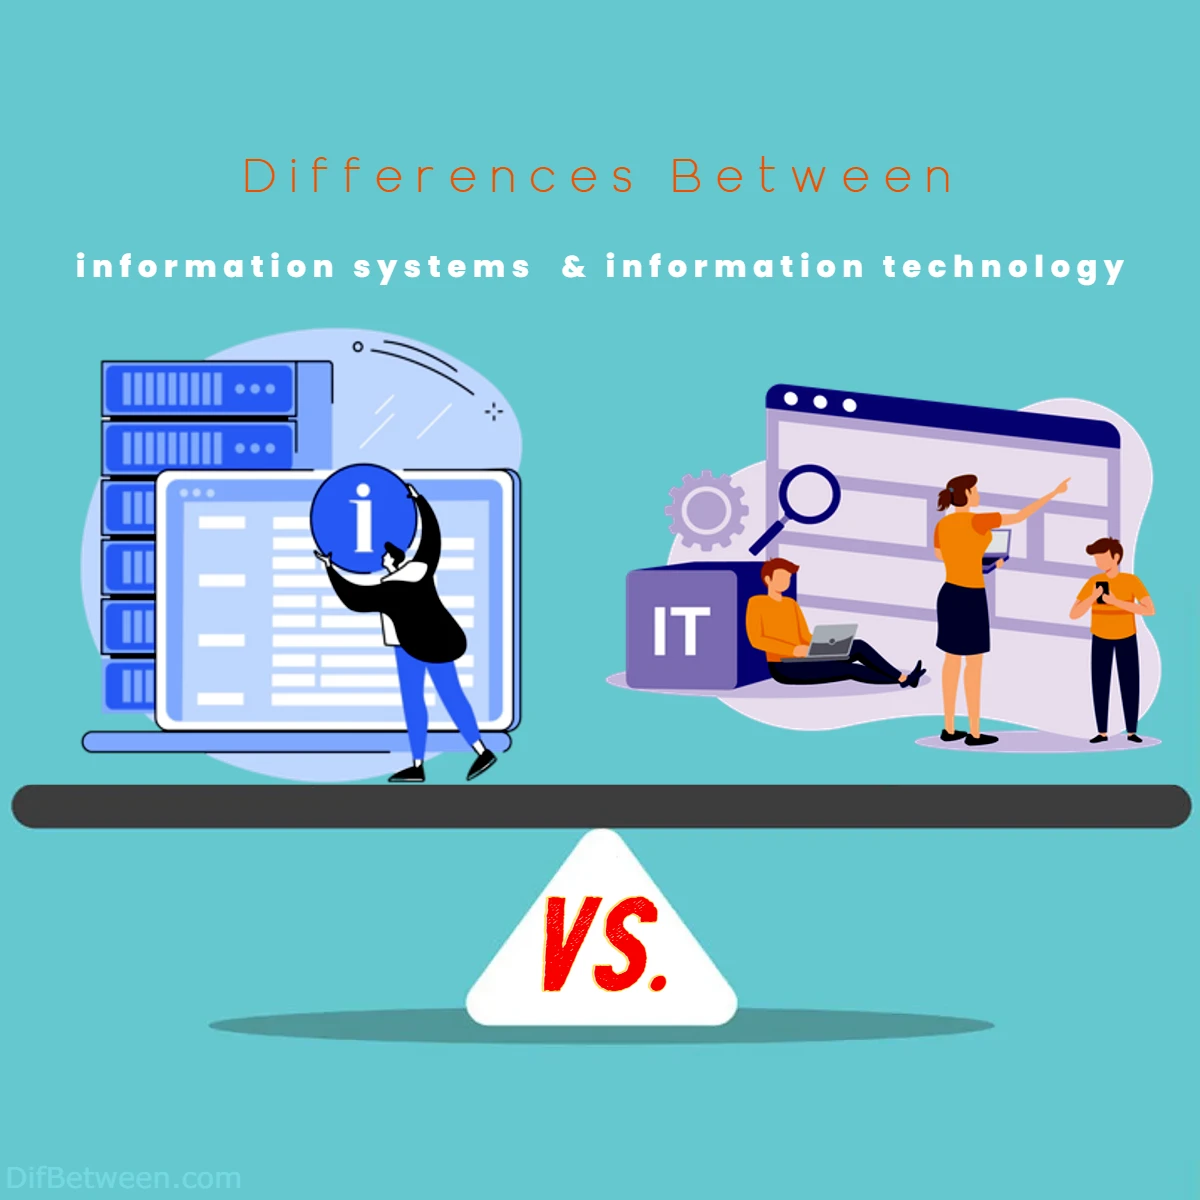 Differences Between information systems vs information technology